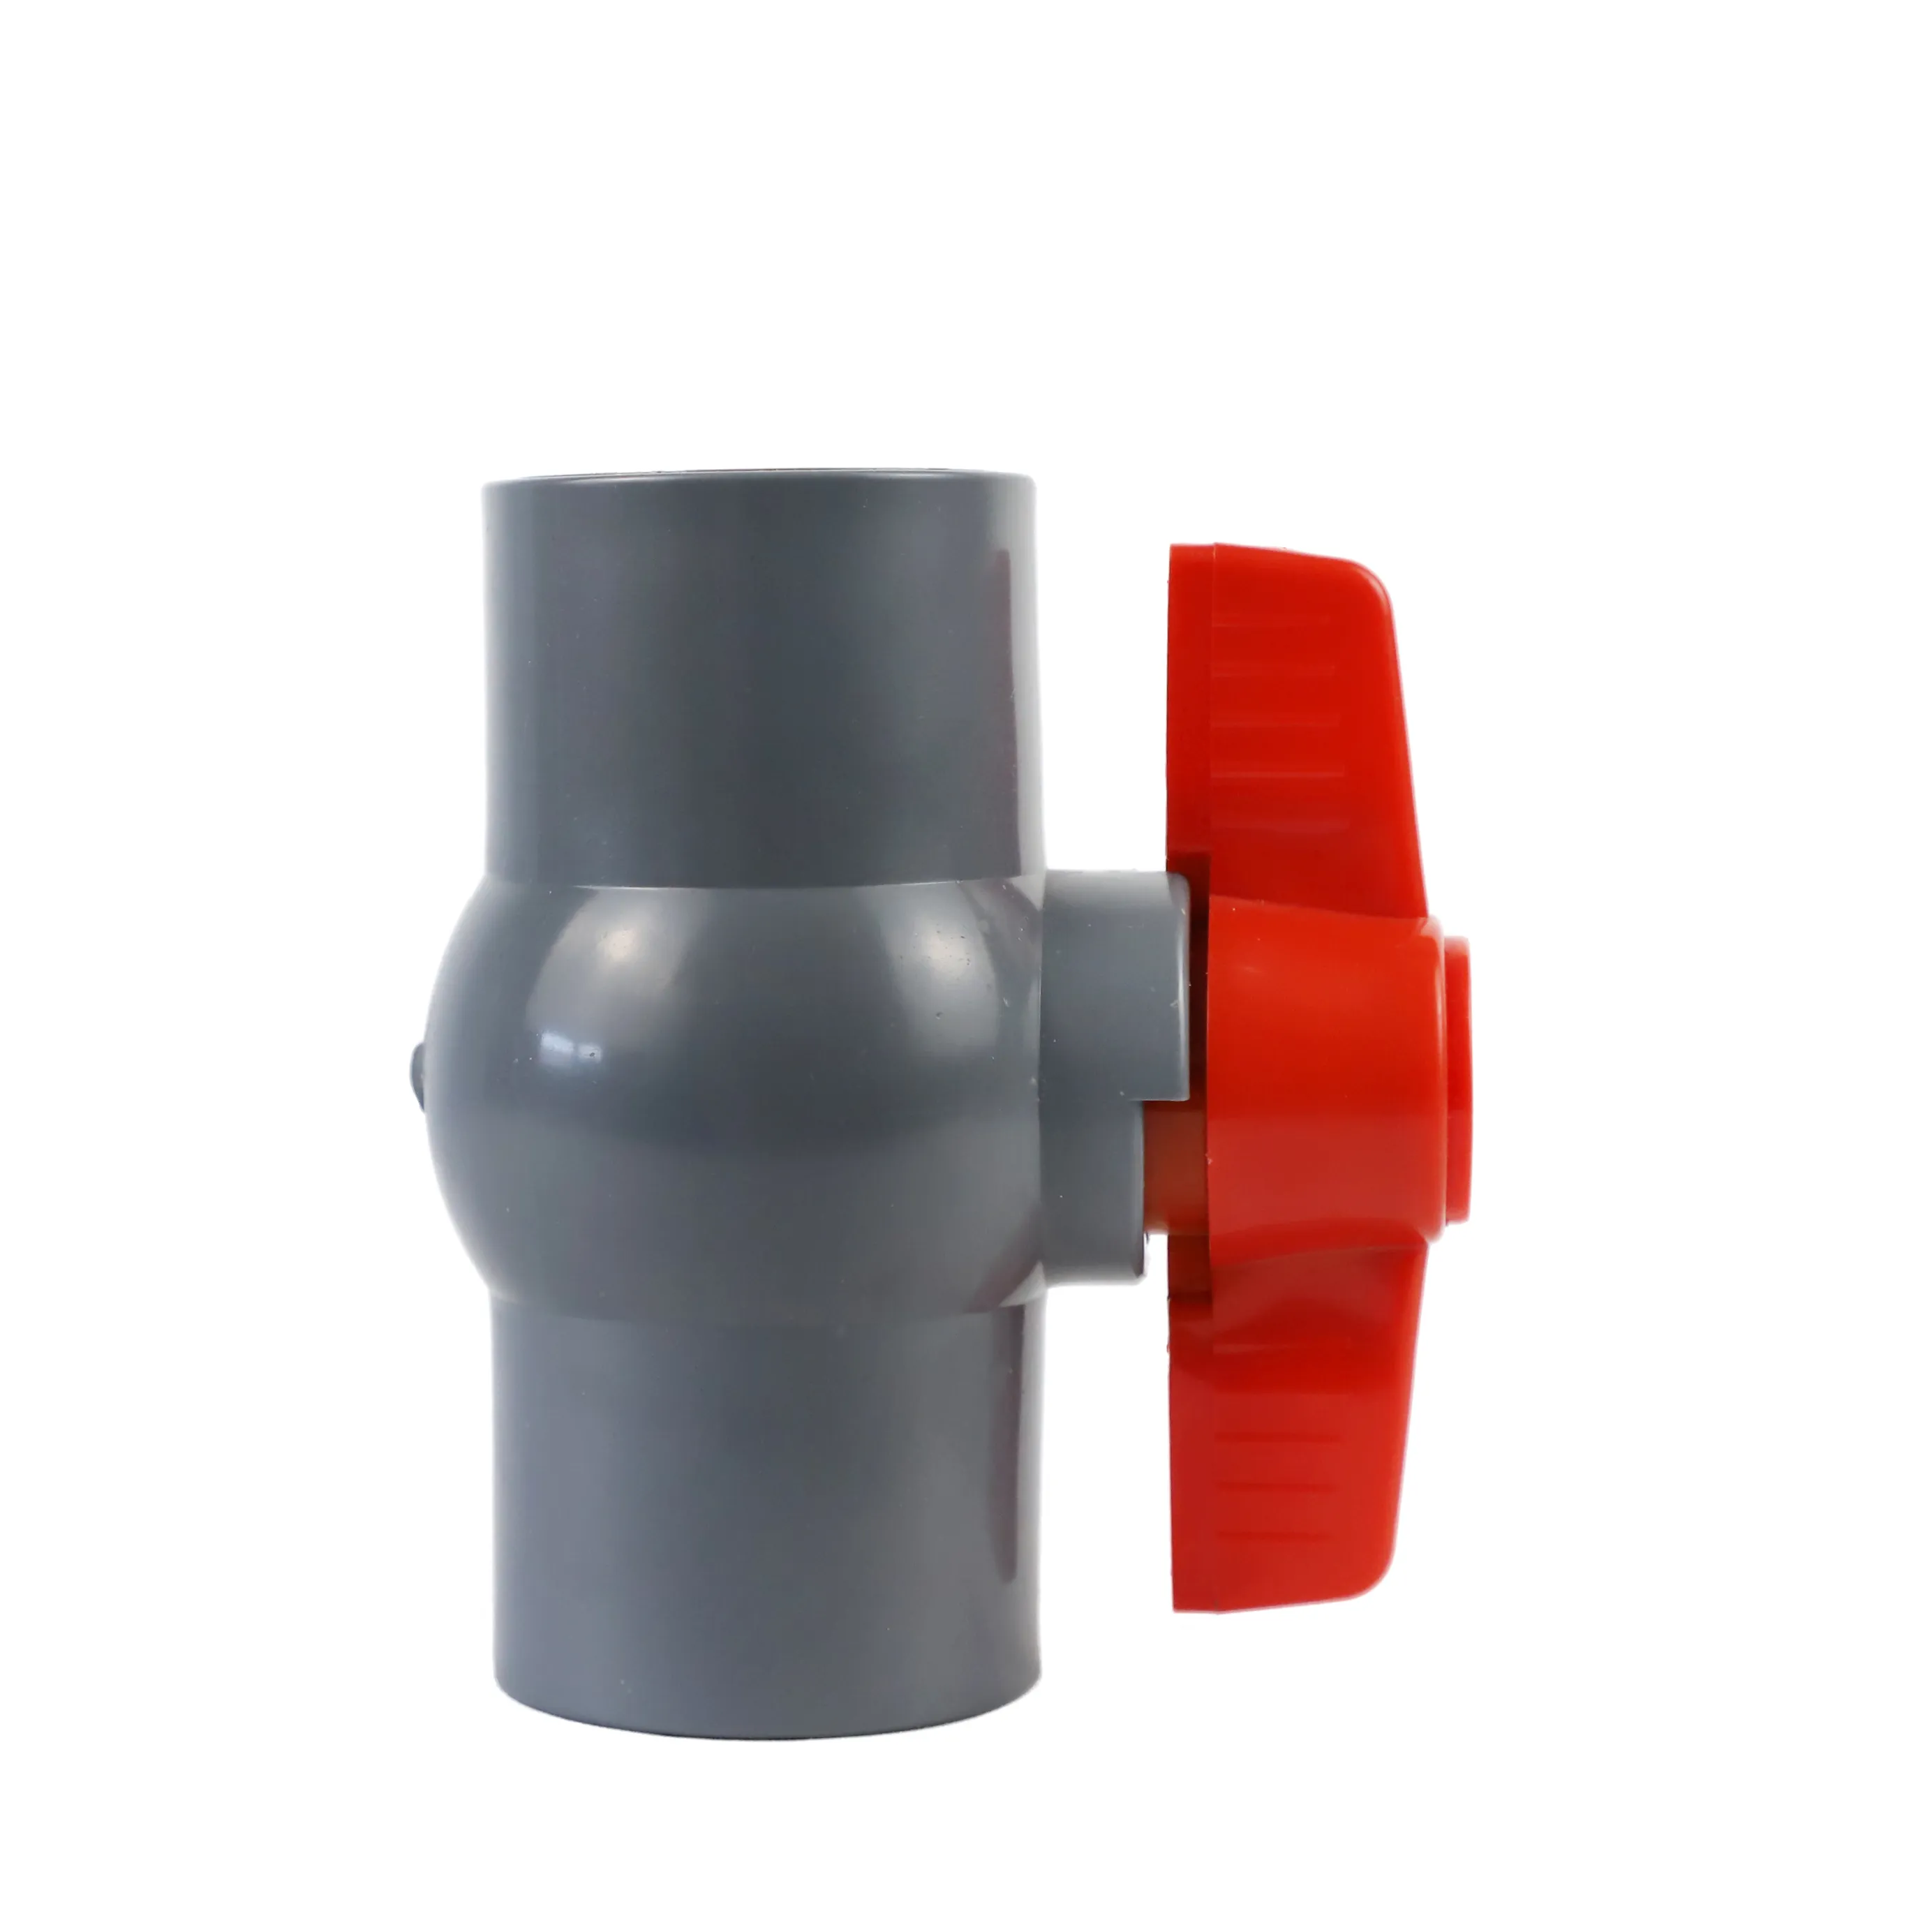 PVC Ball Valves with female thread for agricultural irrigation discharge mainline submain drip irrigation system